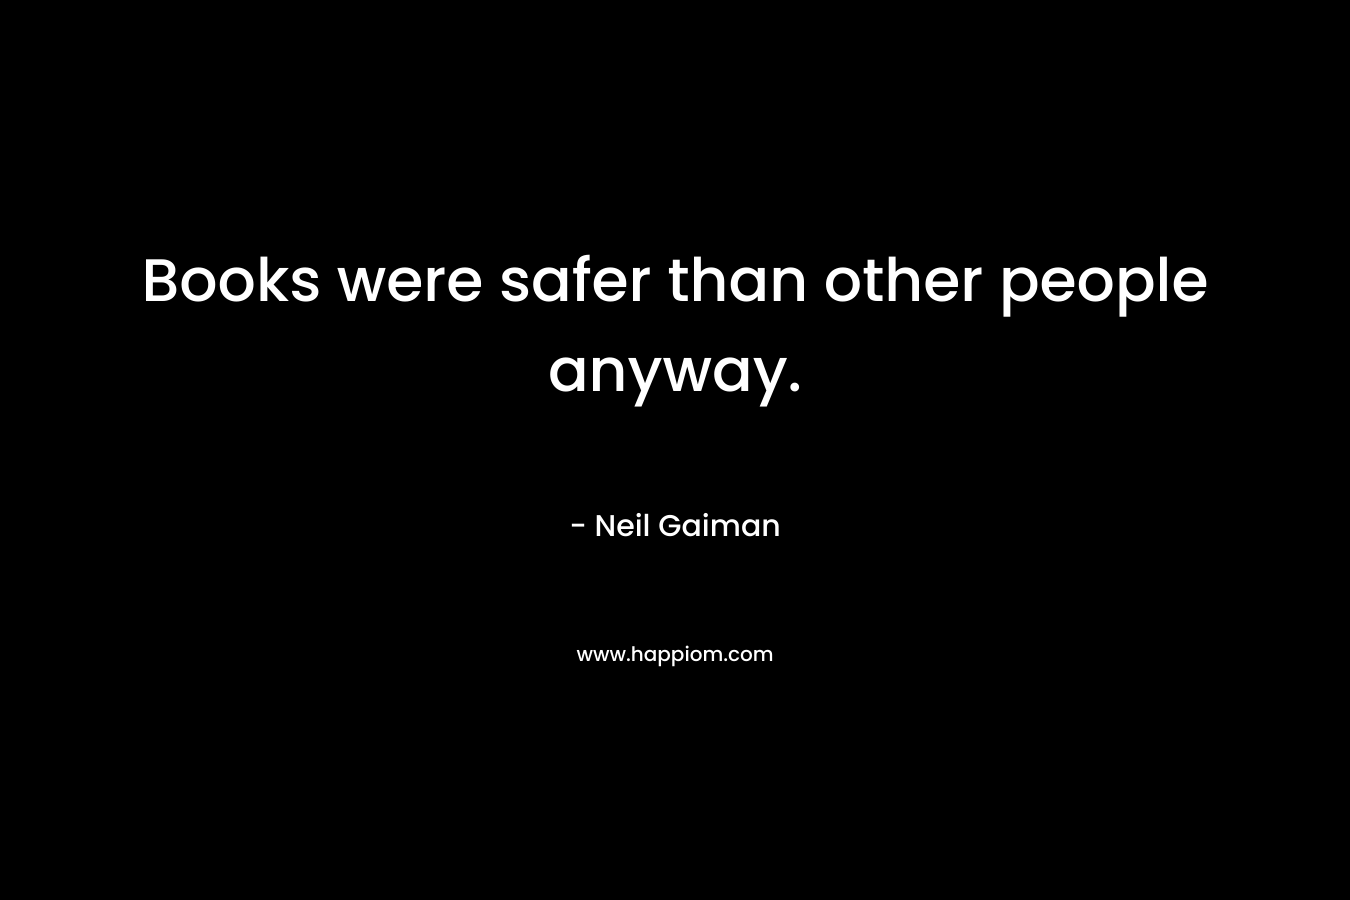 Books were safer than other people anyway.